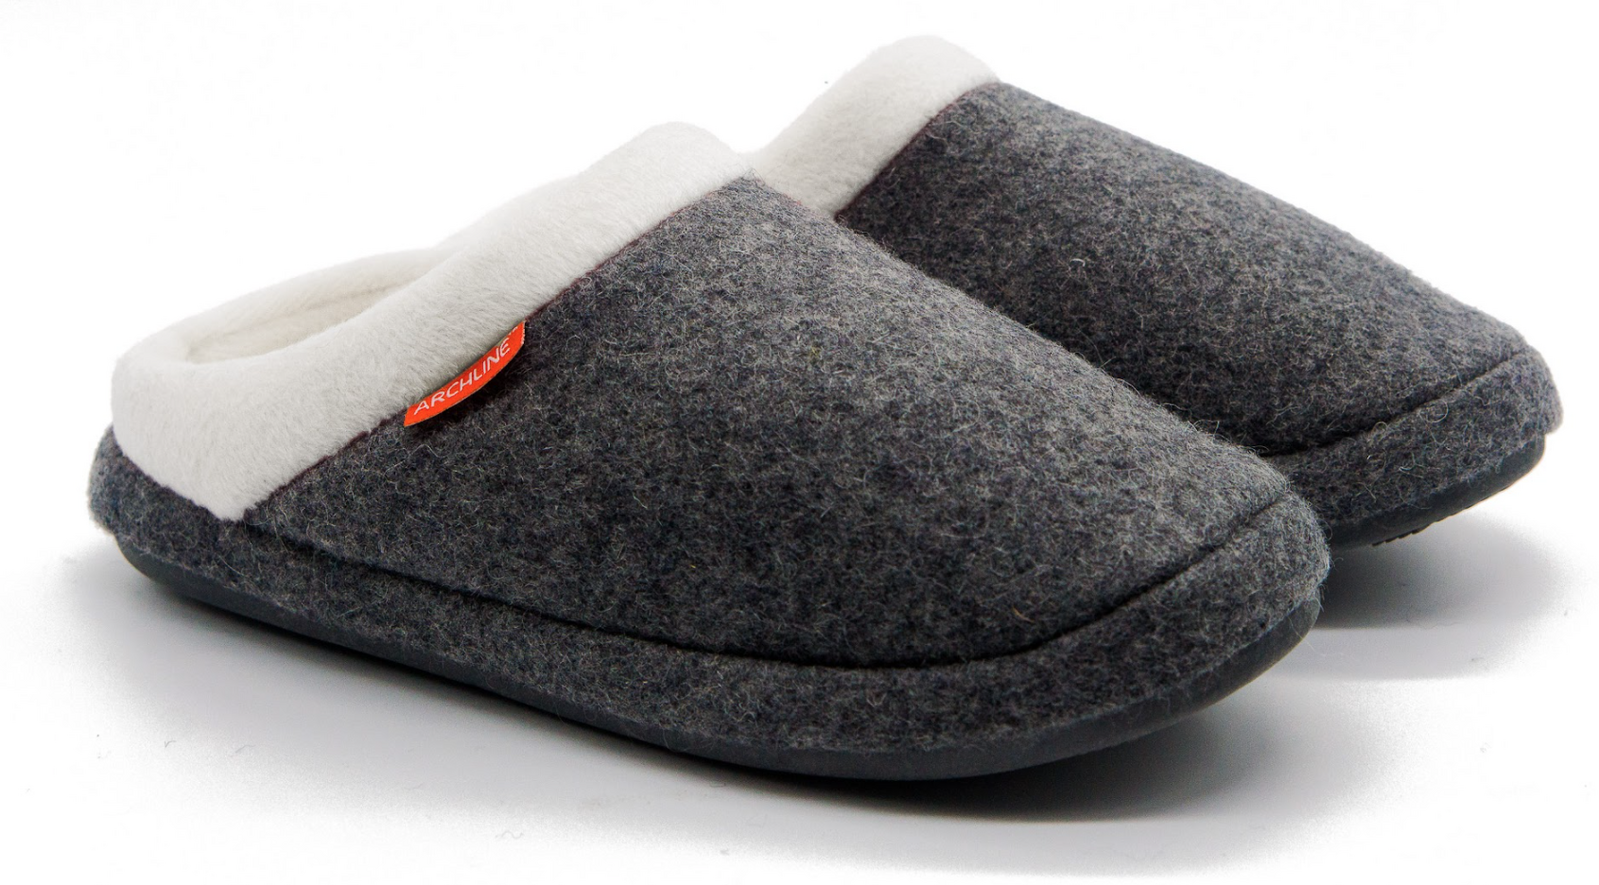 Orthotic Slippers Slip On Arch Scuffs Orthopedic Moccasins - Grey Marle - EUR 42